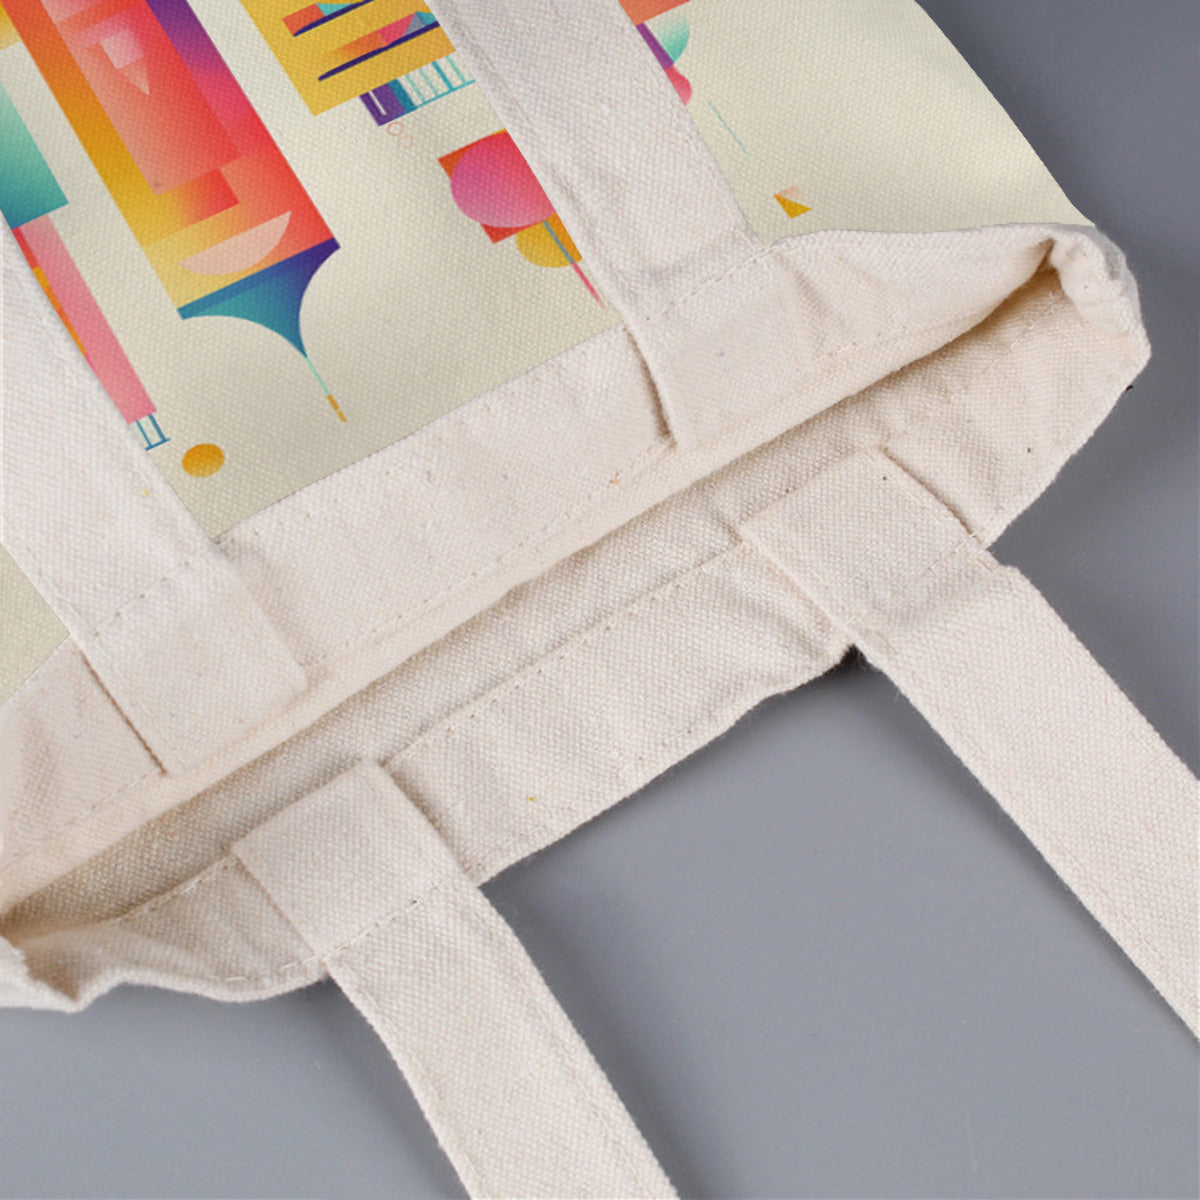 This canvas bag with a cartoon castle print has a wide shoulder strap.